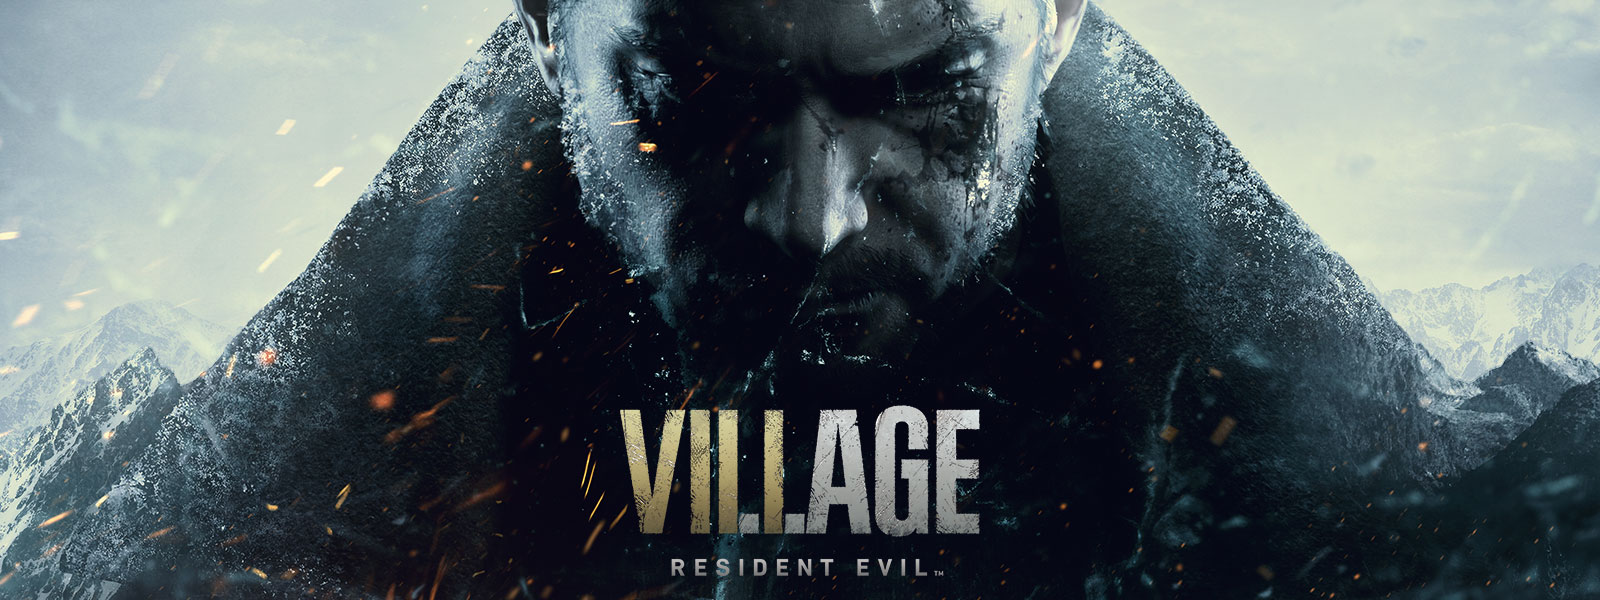 Resident Evil Village, Chris Redfield’s sombre face on the side of a mountain